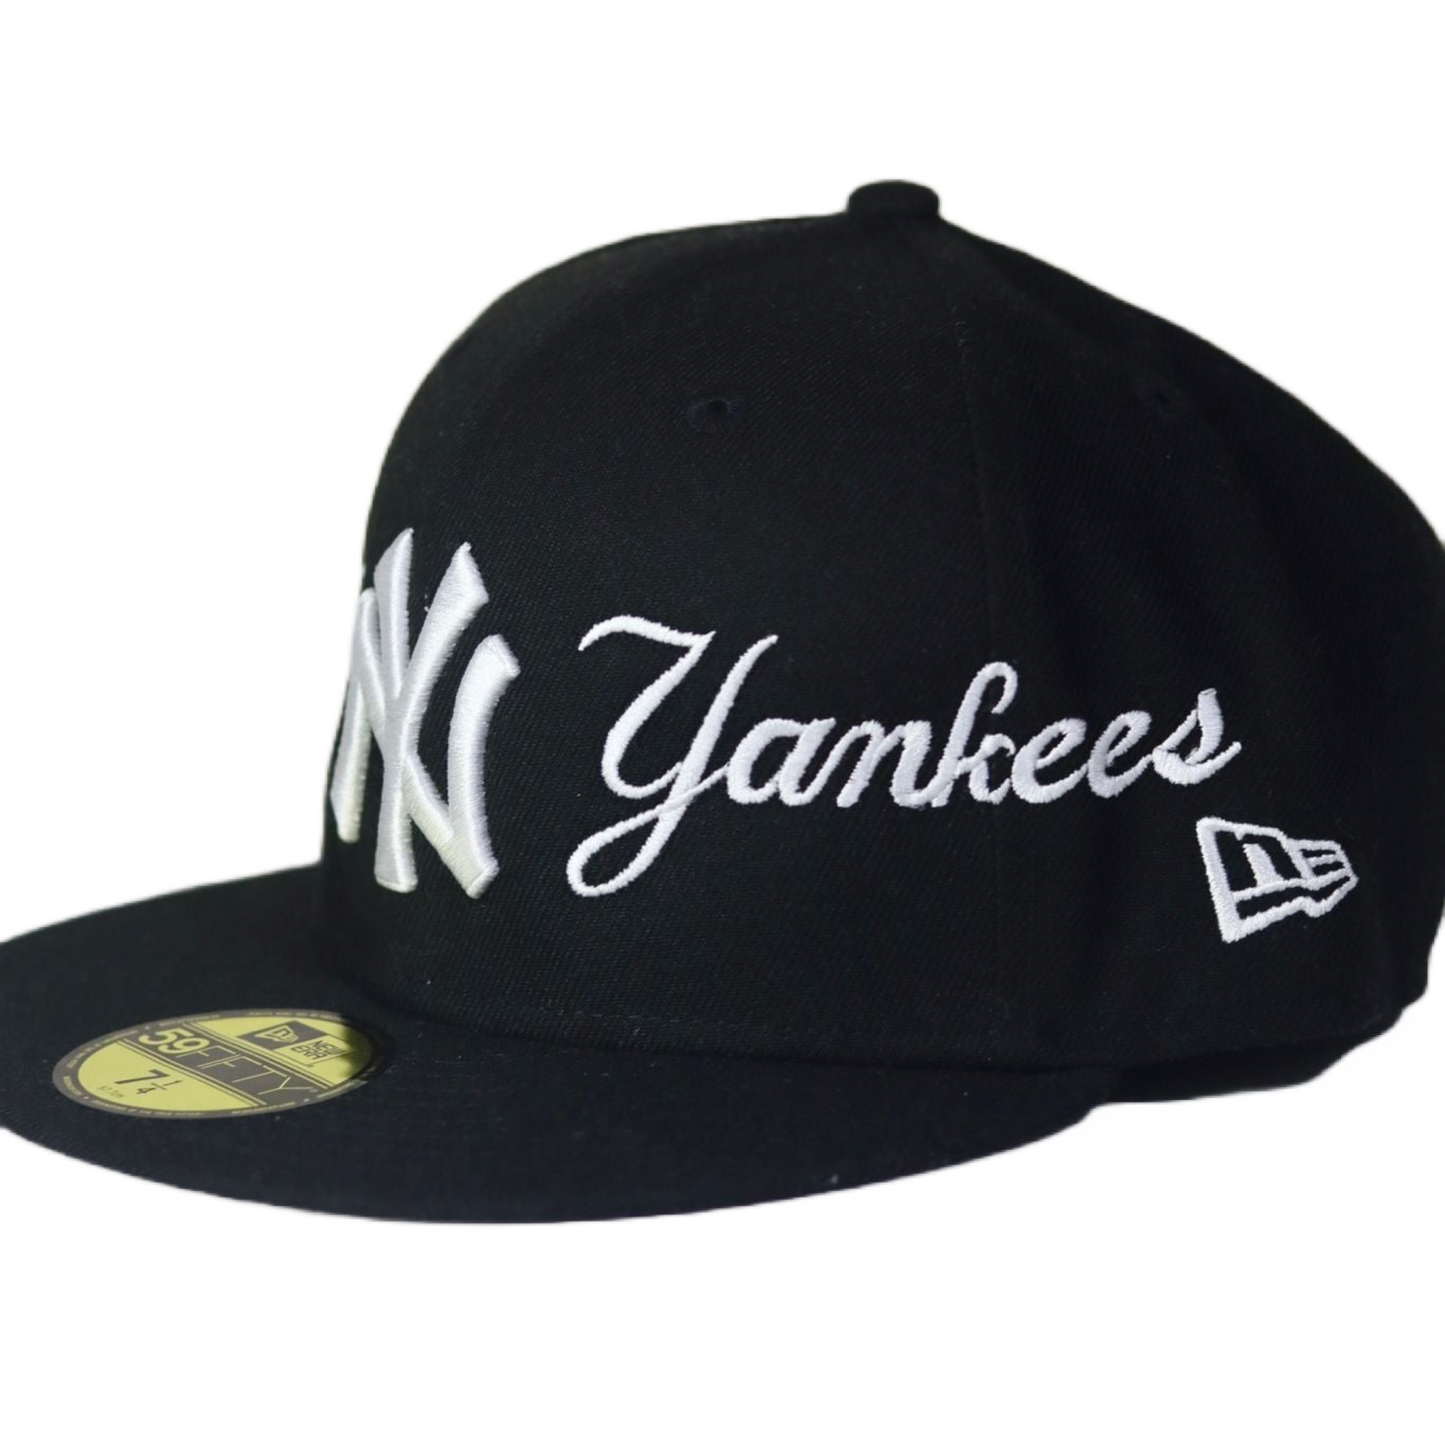 "Spell Out" New York Yankees UK Fitteds Exclusive 59FIFTY Fitted Hat